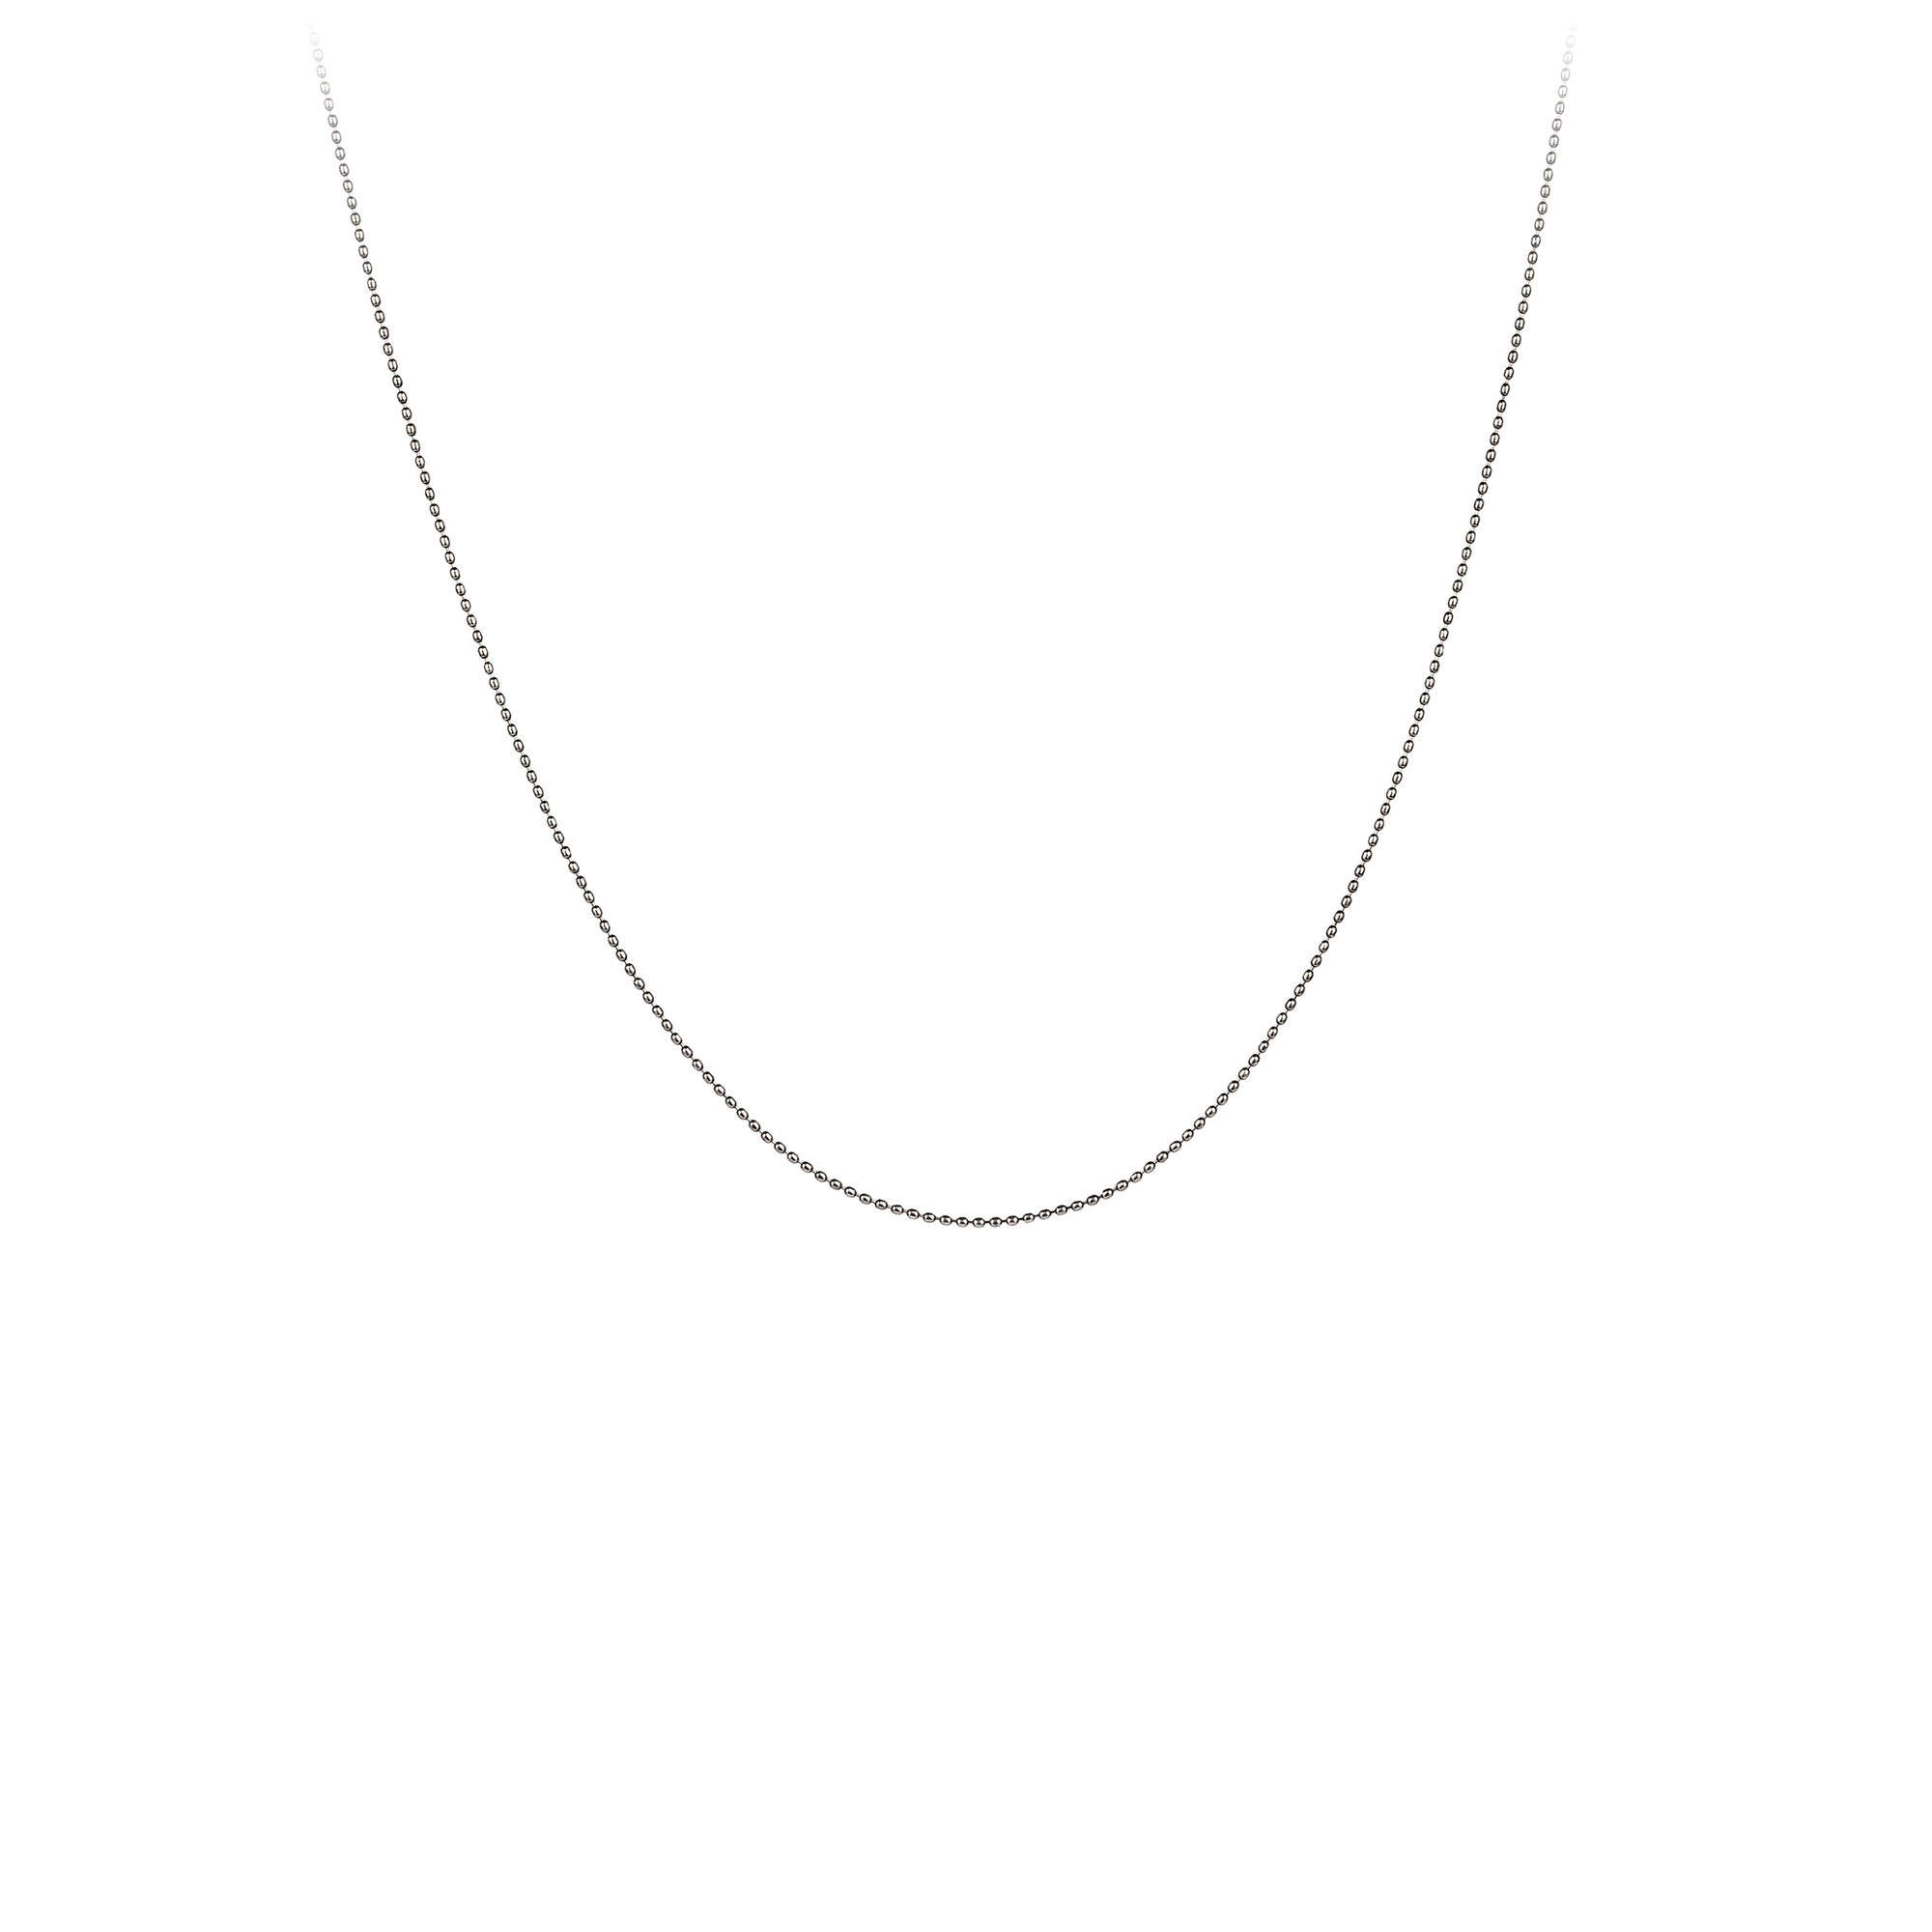 A sterling silver chain with fine ball links